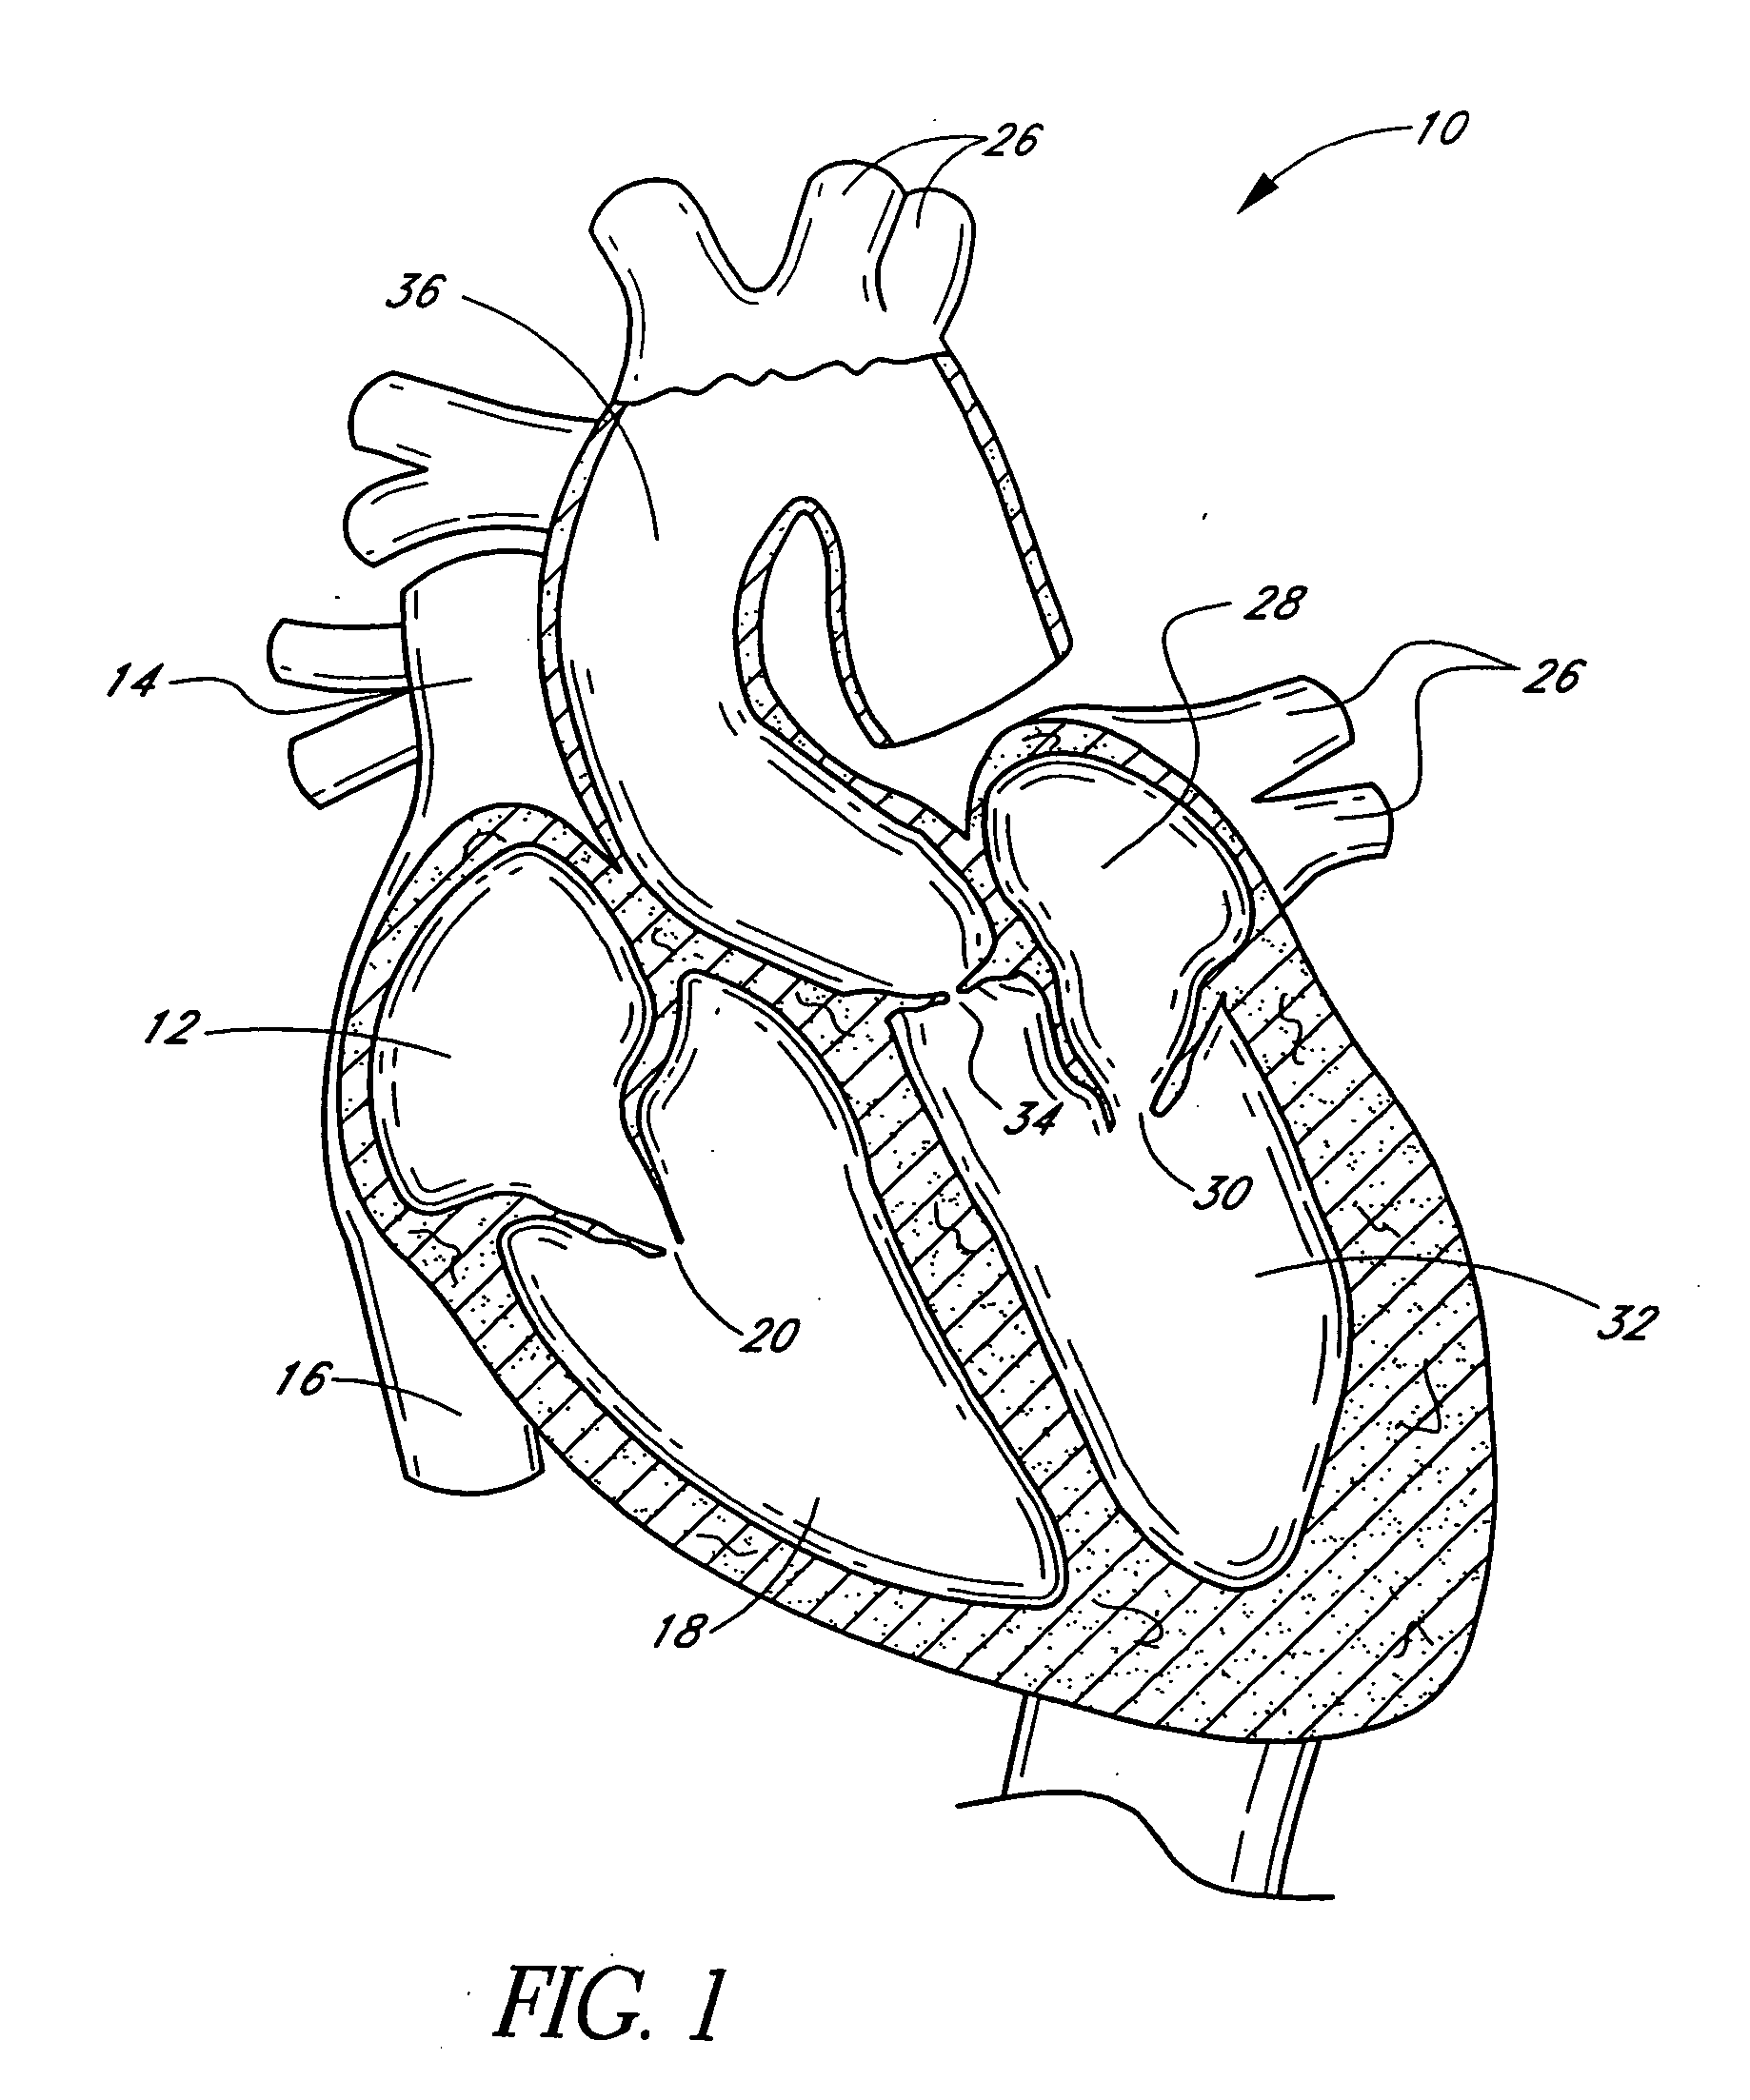 Translumenally implantable heart valve with multiple chamber formed in place support